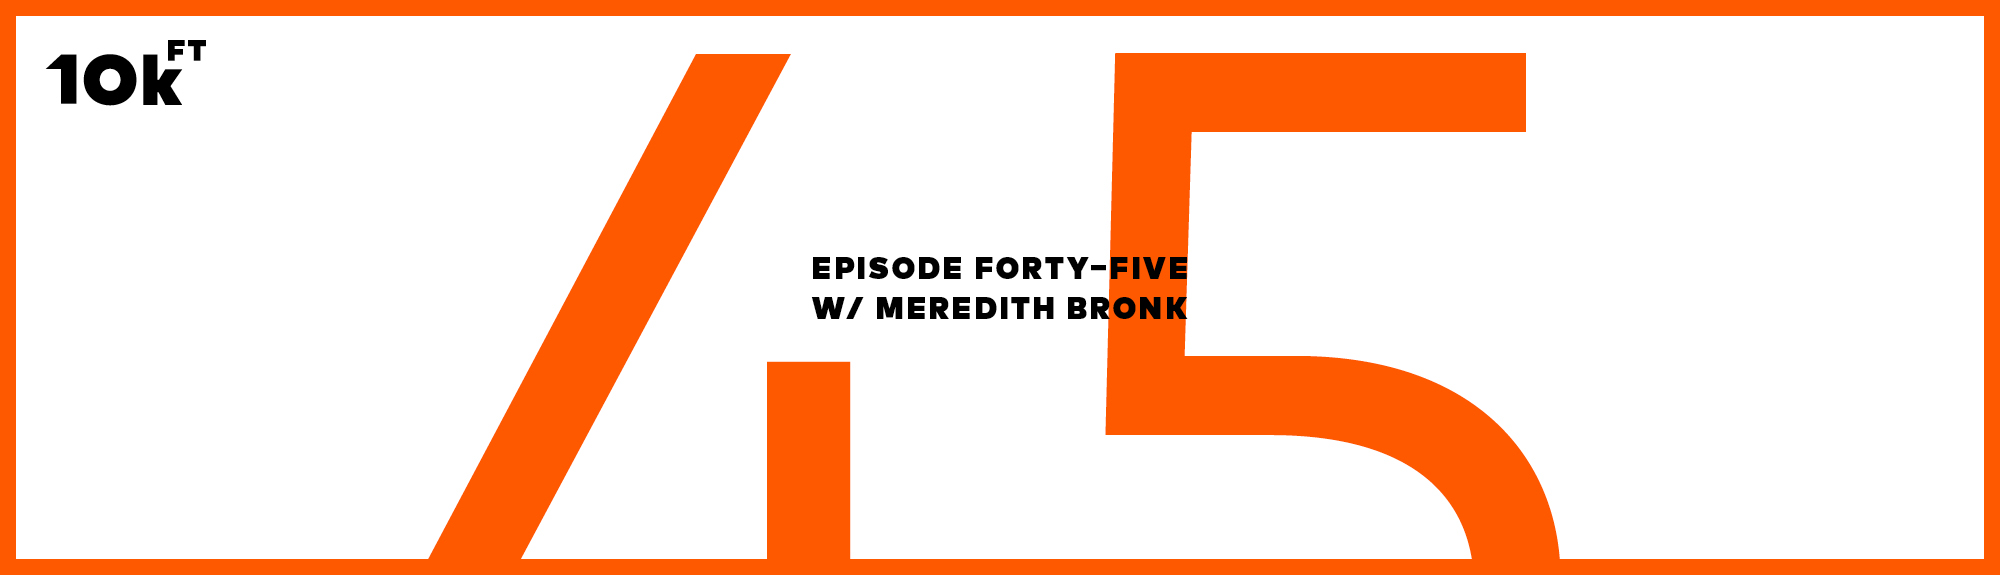 Orange rectangle with a white inside background. Top right corner has "10k ft" written. In the middle, the text reads "Episode Forty-Five w/ Meredith Bronk". A large "45" is written in orange behind this middle text